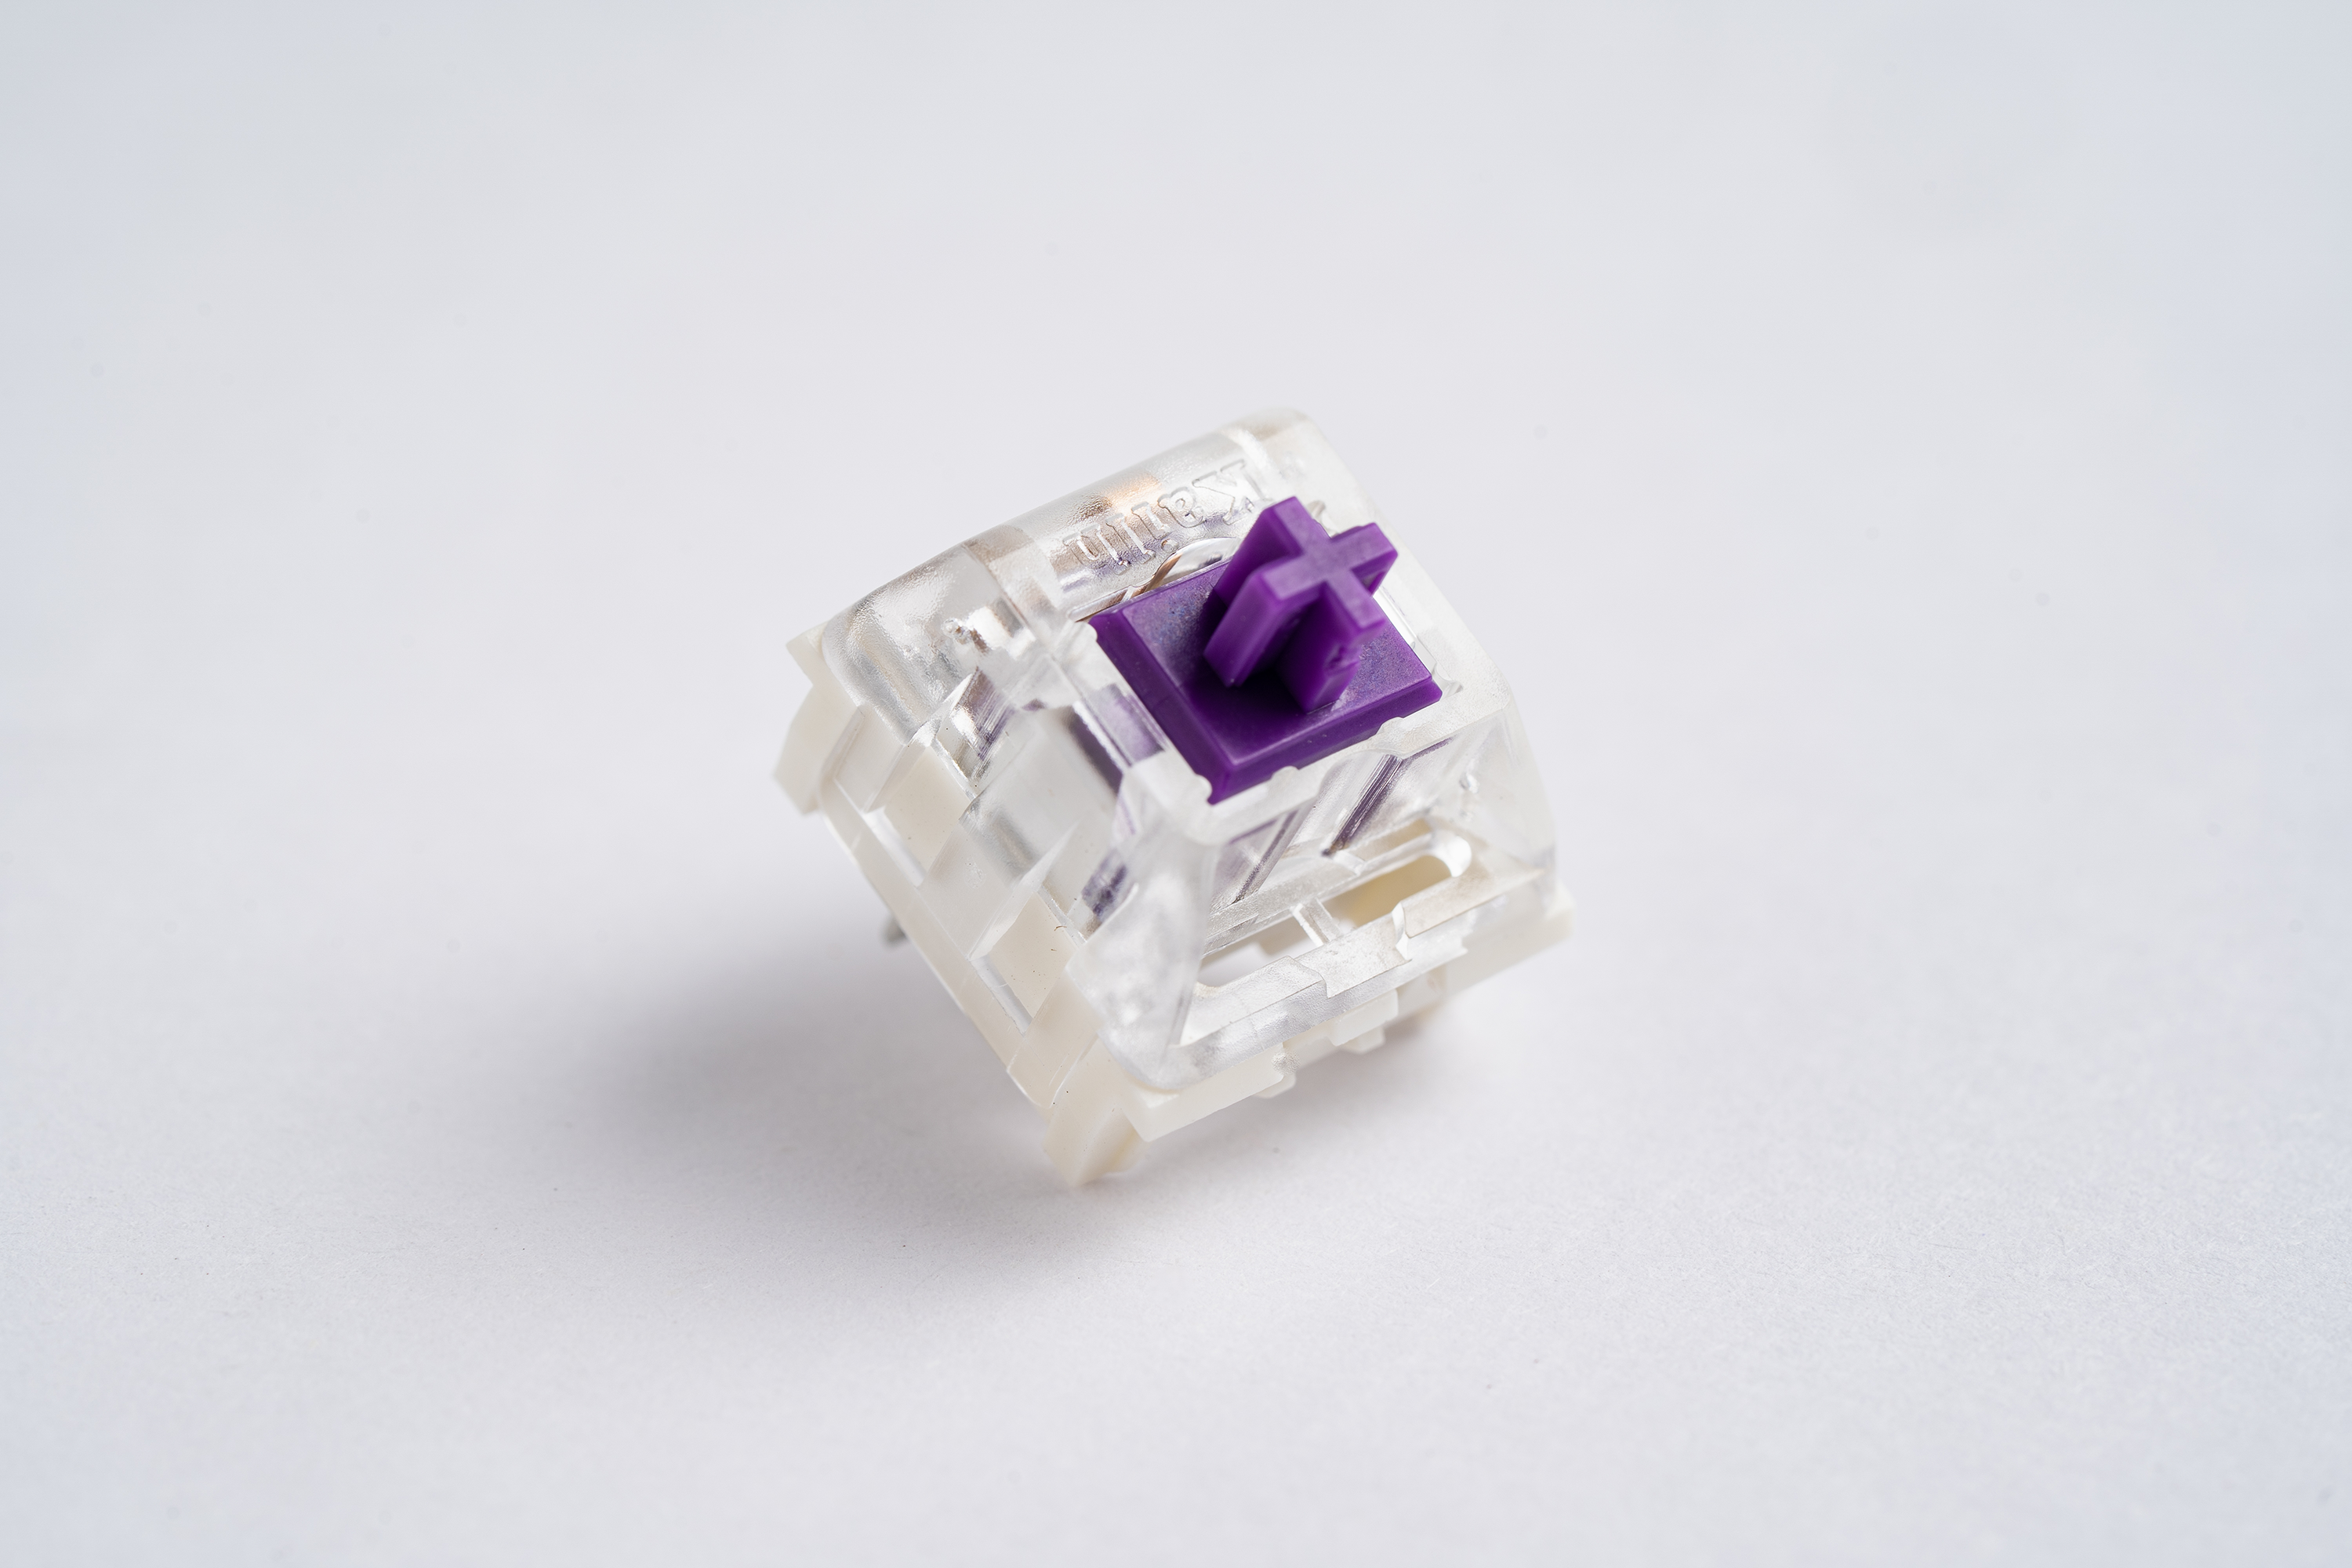 Kailh PRO Switches